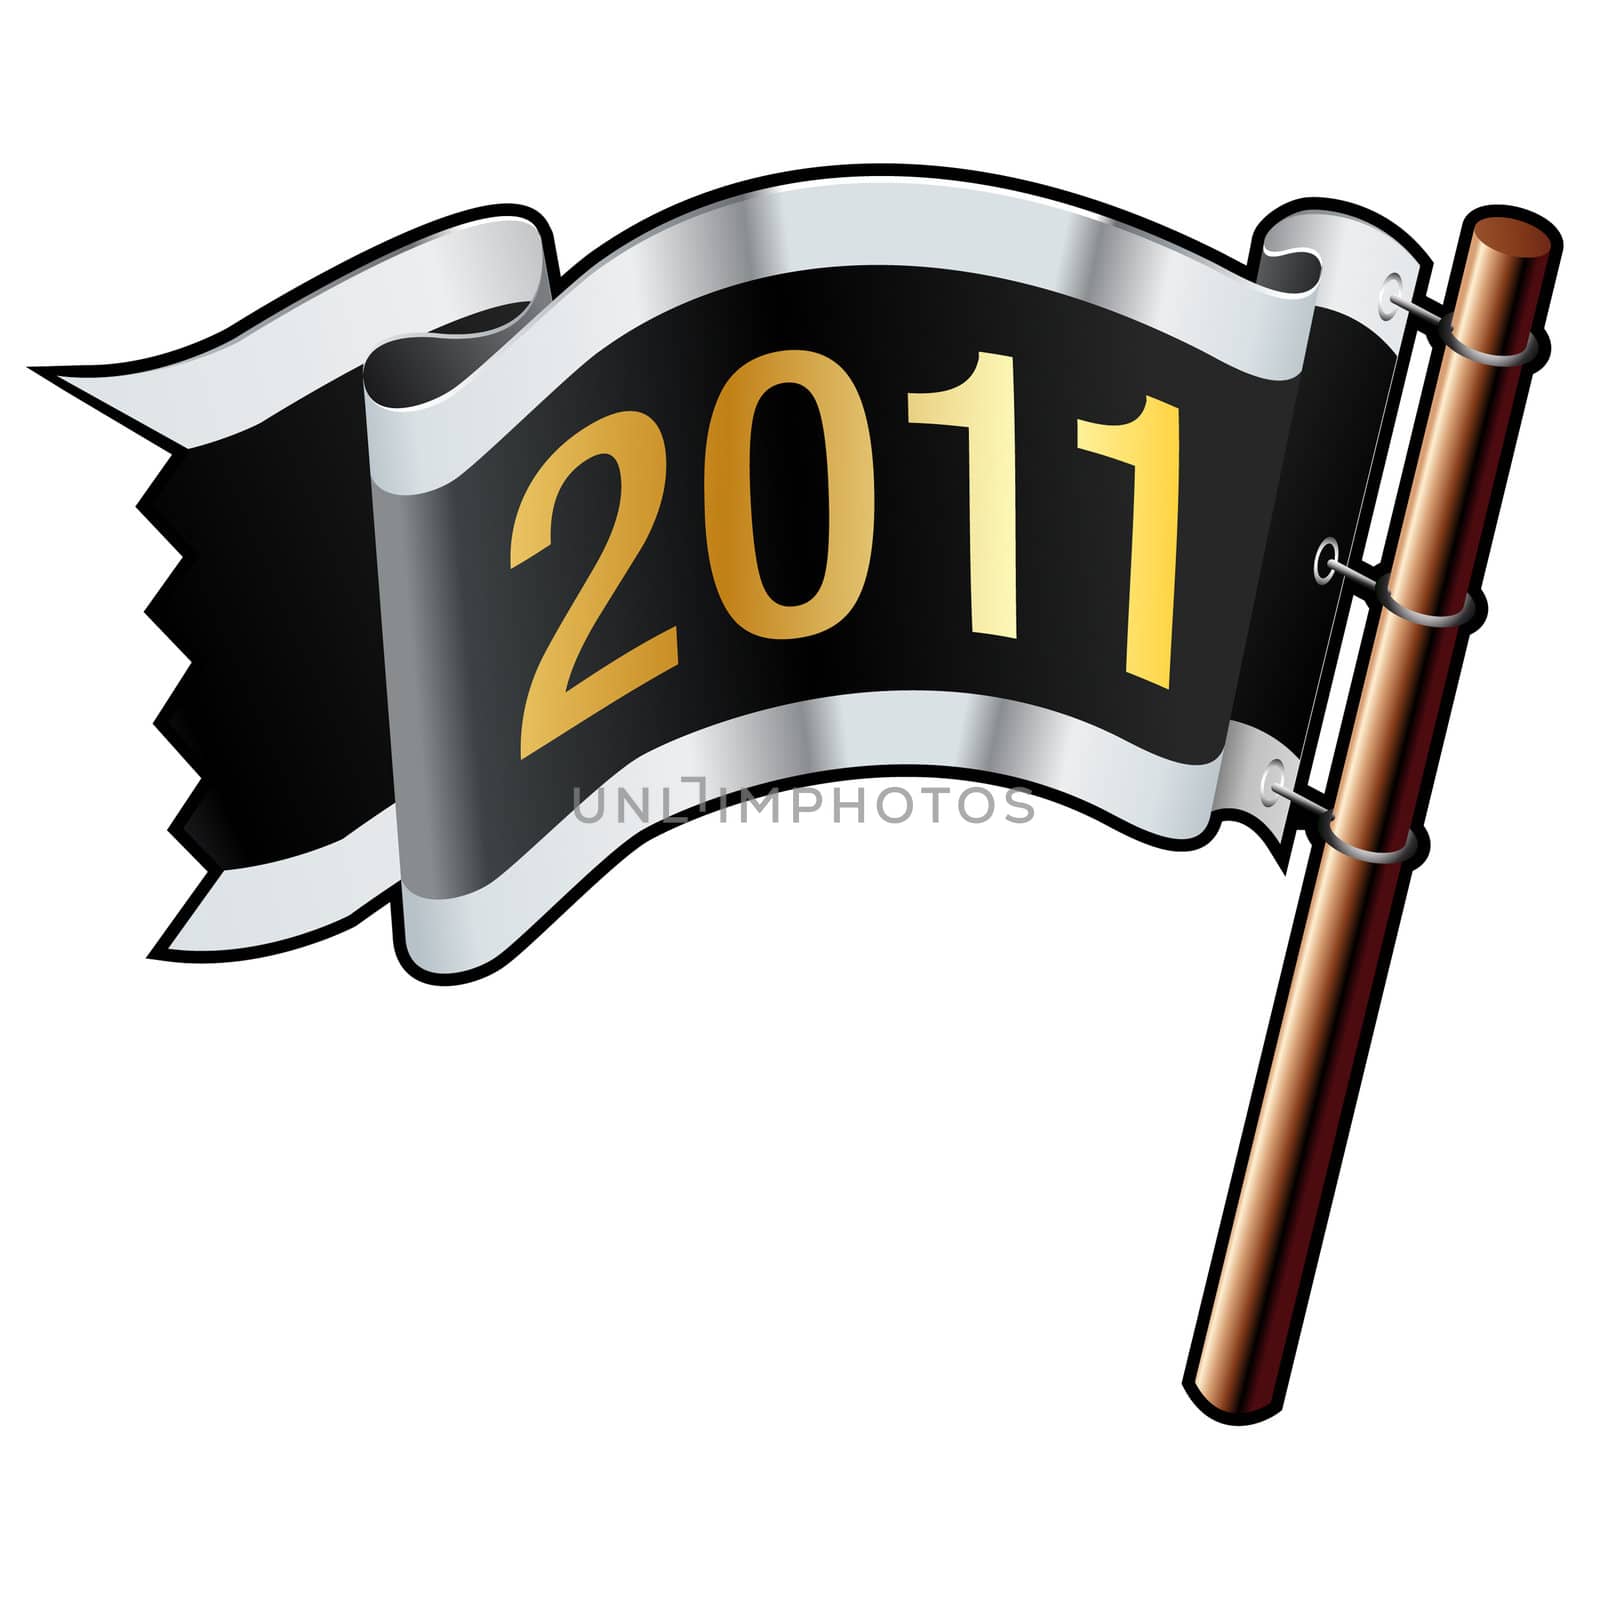 2011 year calendar icon on black, silver, and gold vector flag good for use on websites, in print, or on promotional materials